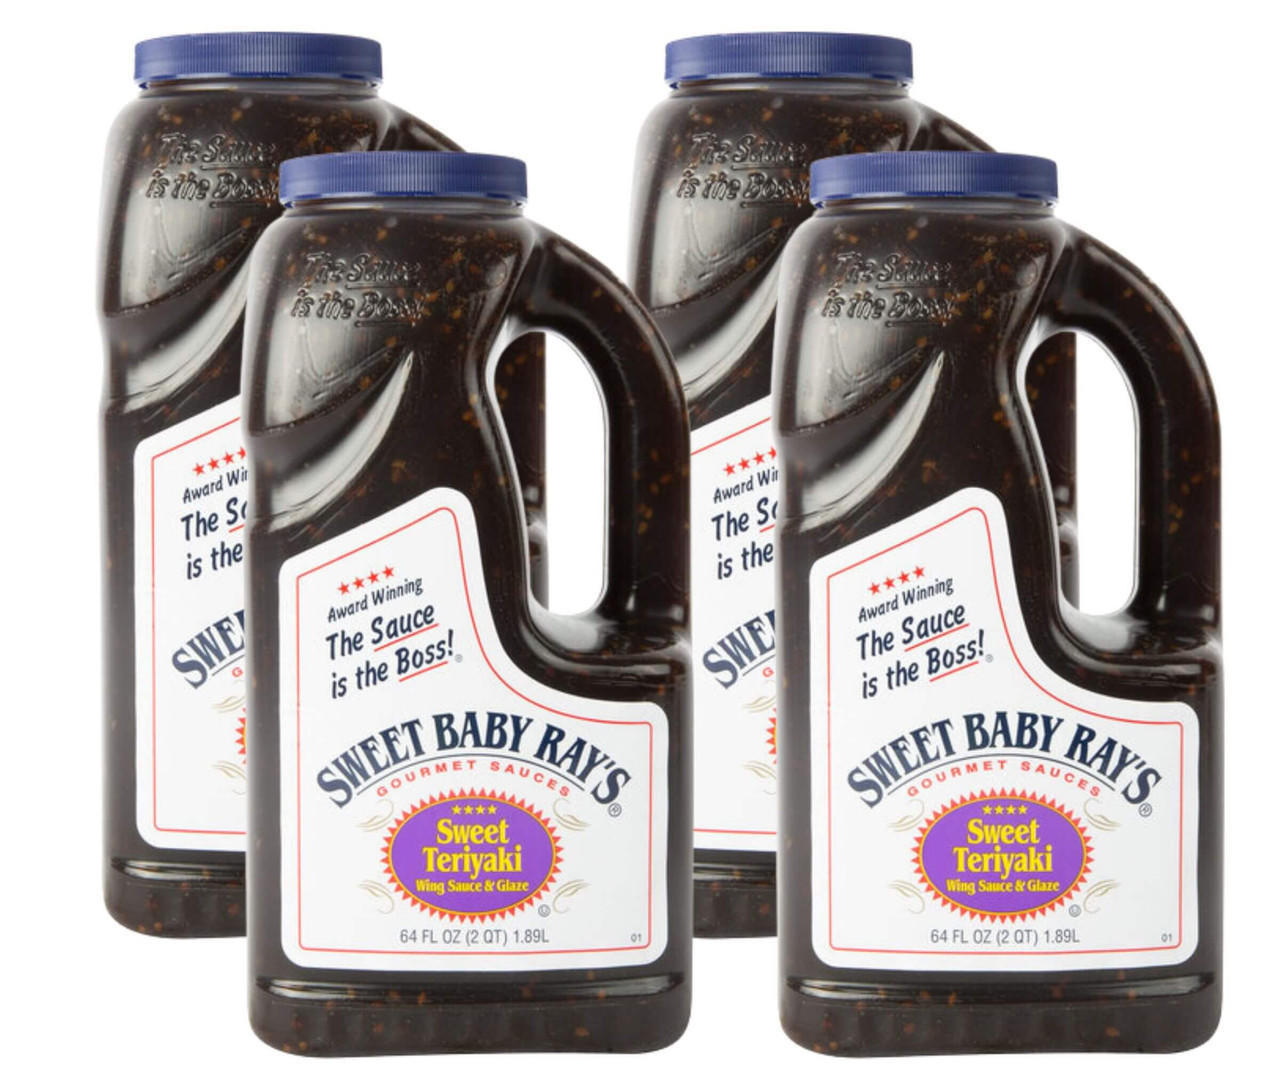  Sweet Baby Ray's 0.5 Gallon Sweet Teriyaki Wing Sauce and Glaze - 4/Case | Irresistibly Sweet and Savory in Bulk 